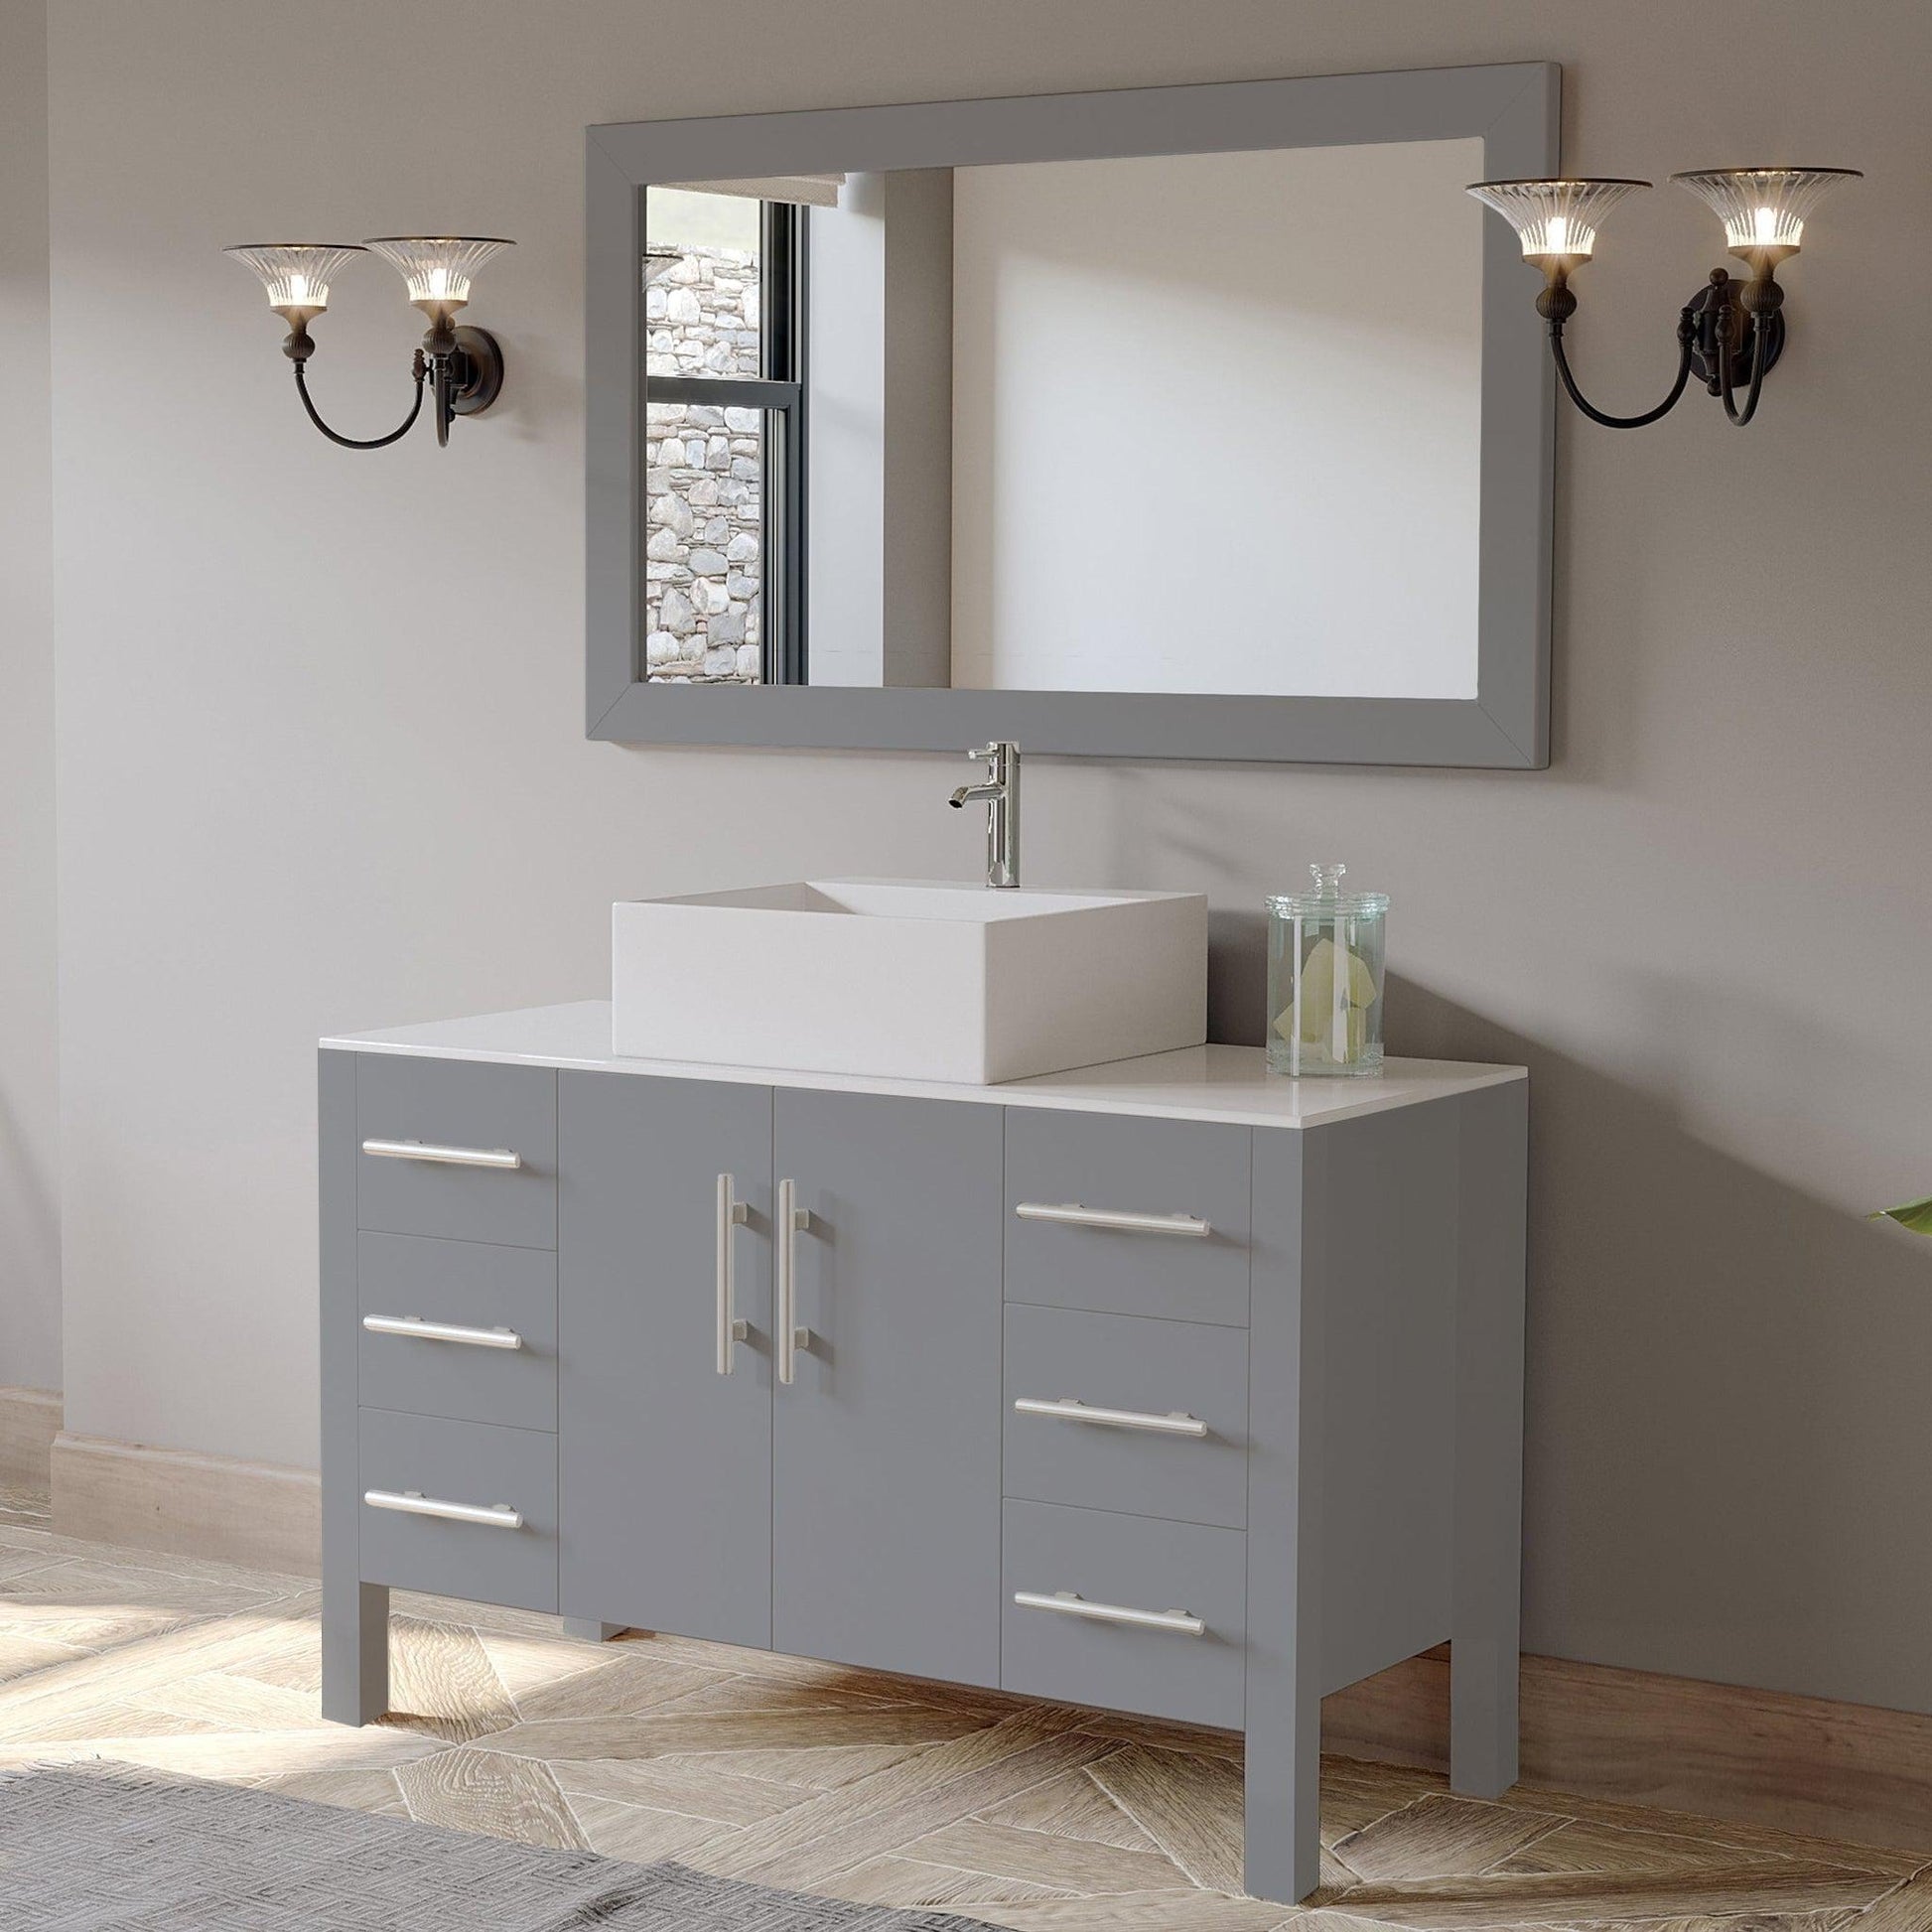 Cambridge Plumbing 48" Gray Wood Single Vanity Set With Porcelain Countertop And Square Vessel Sink With Faucet Hole And Polished Chrome Plumbing Finish